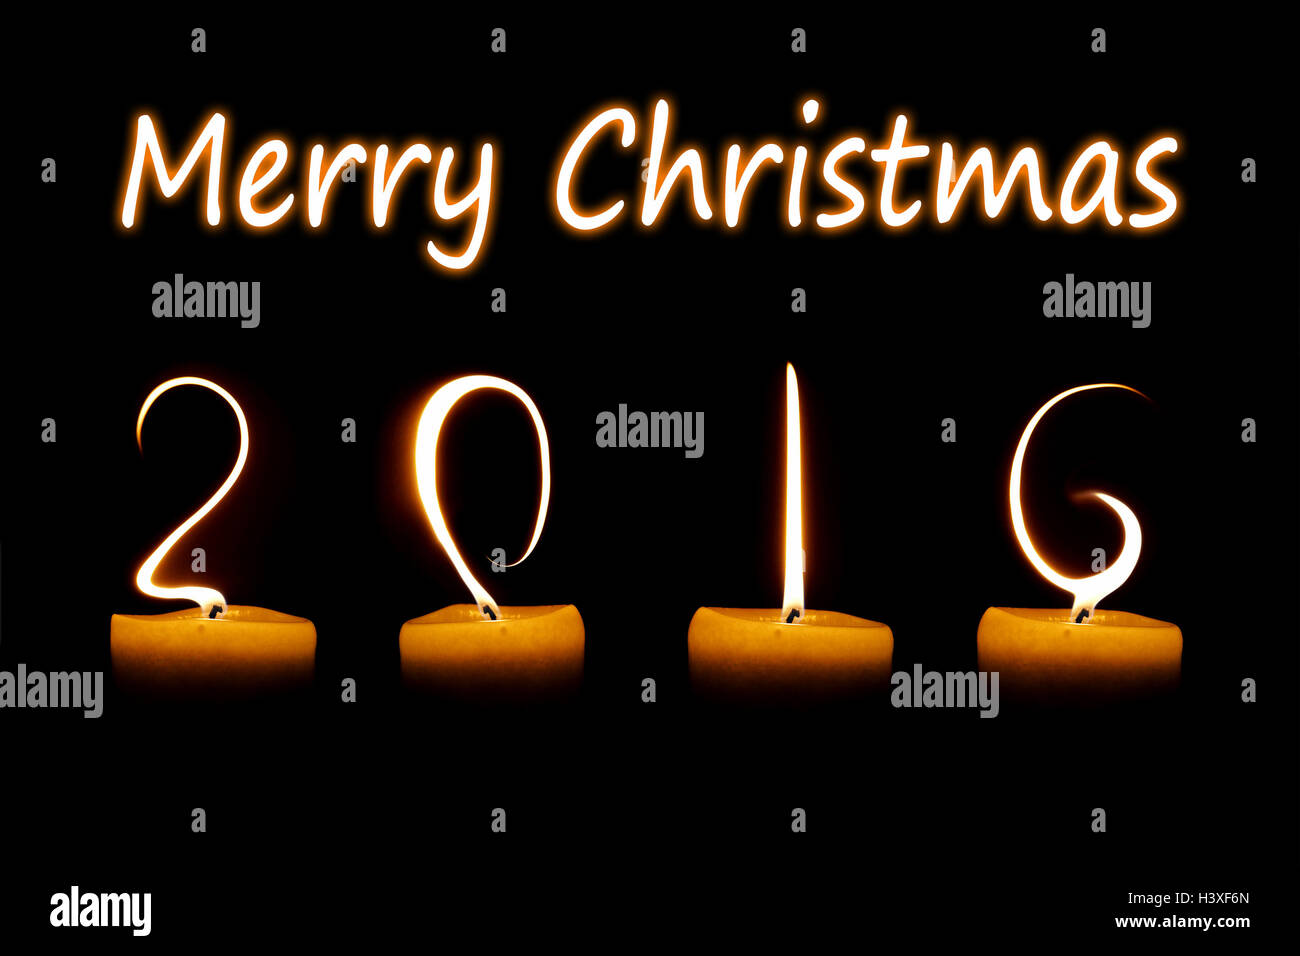 Merry Christmas 2016 written with candle flames on black background Stock Photo